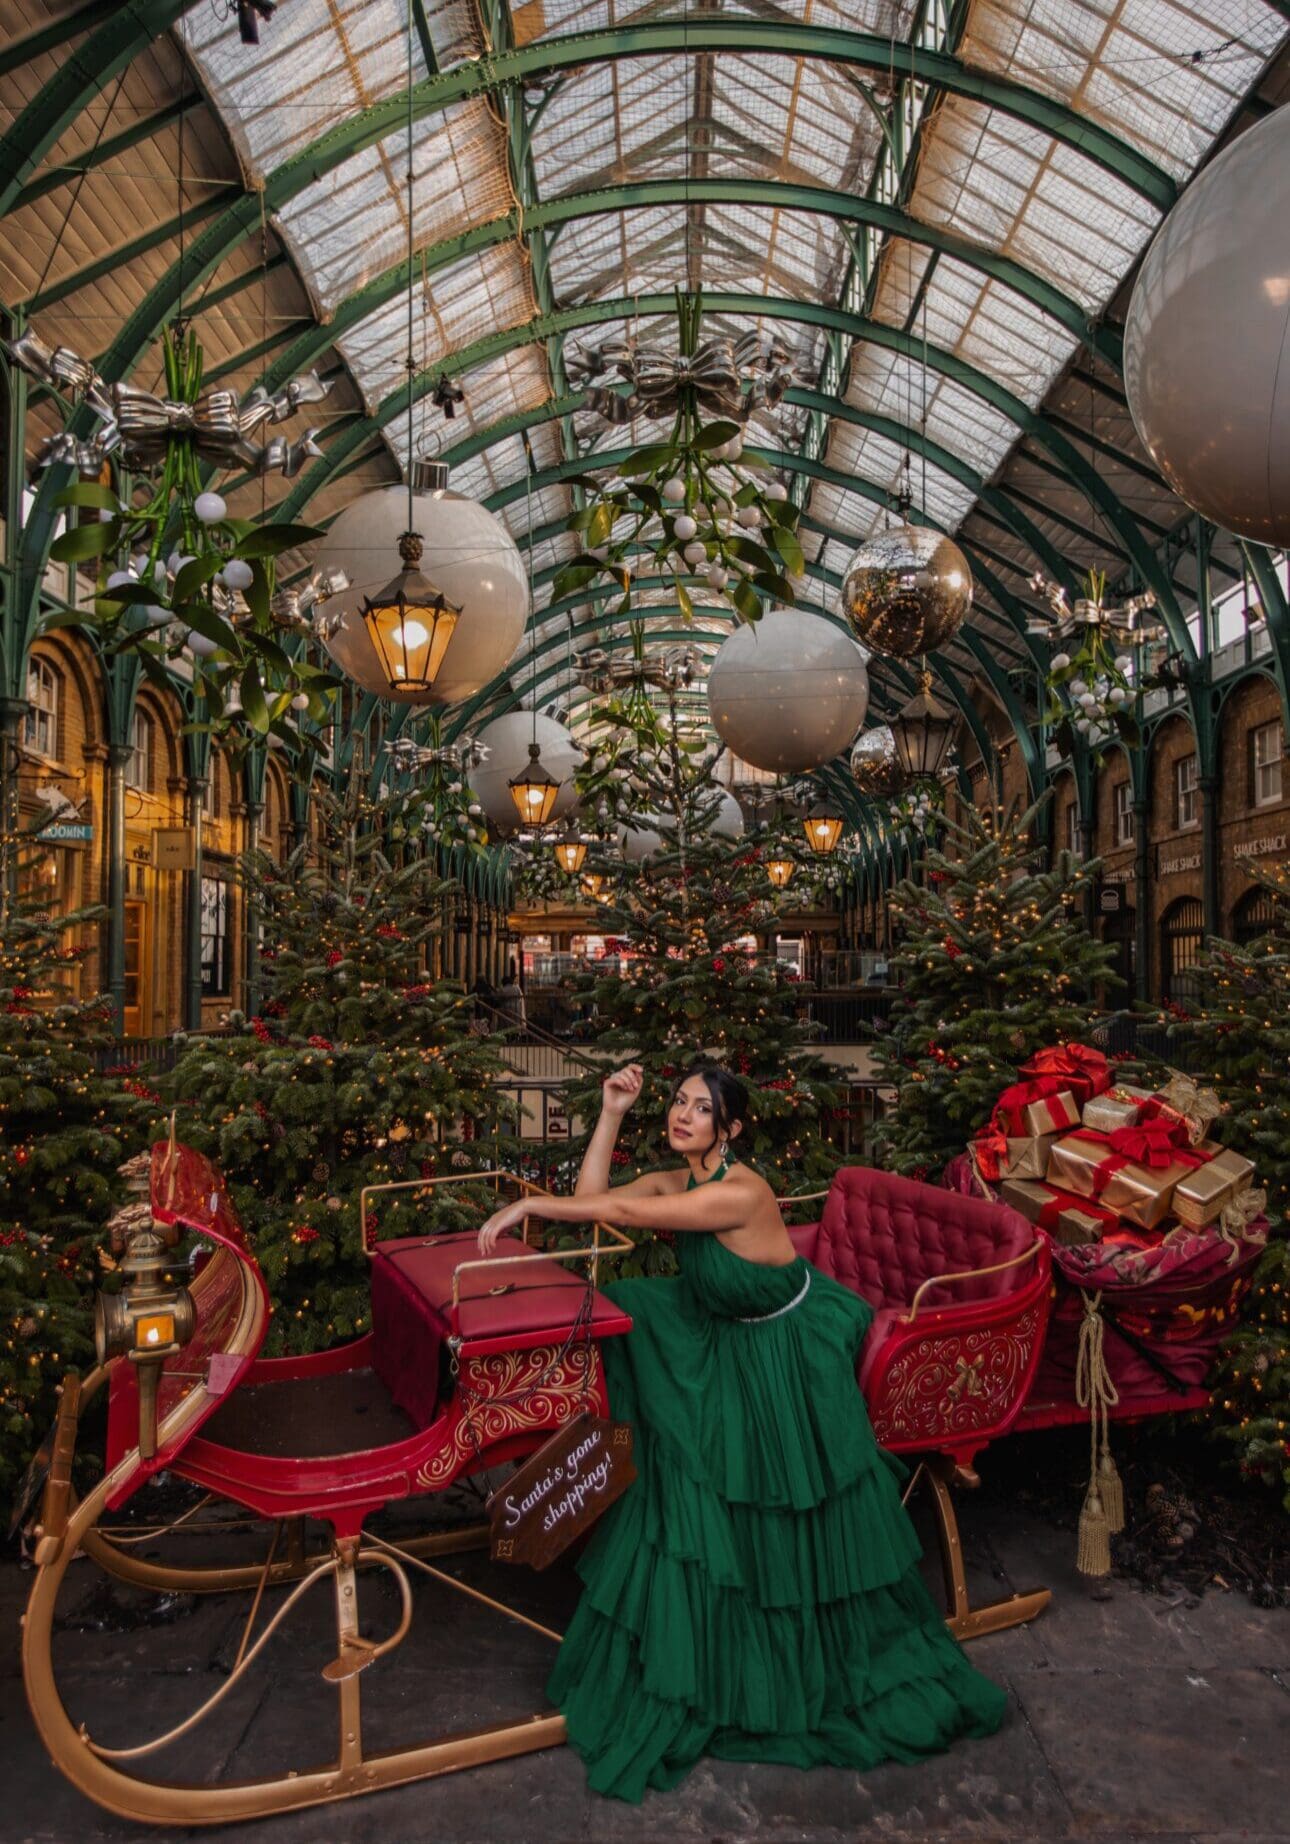 Covent Garden Piazza Christmas in London Display Instagram Photo Opp Sleigh